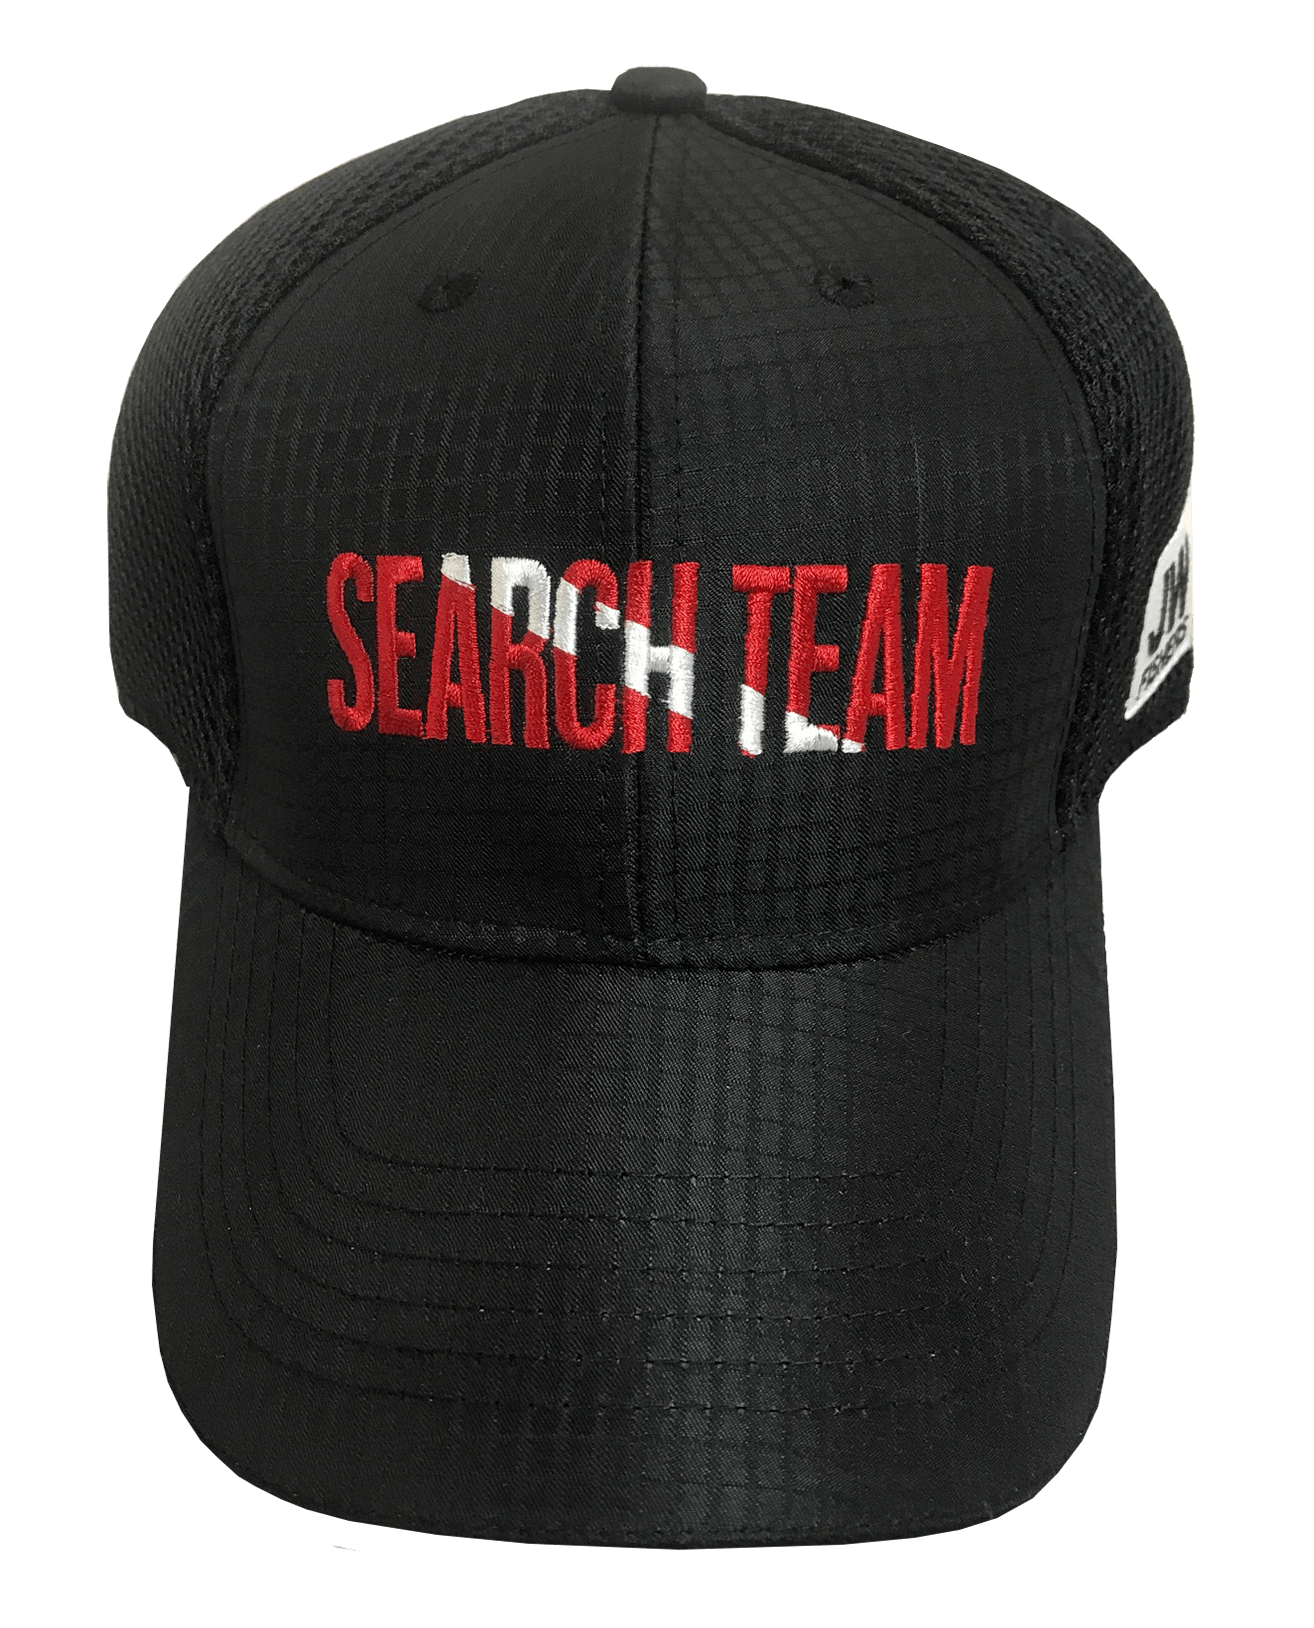 Black hat with 'Search Team' text on it